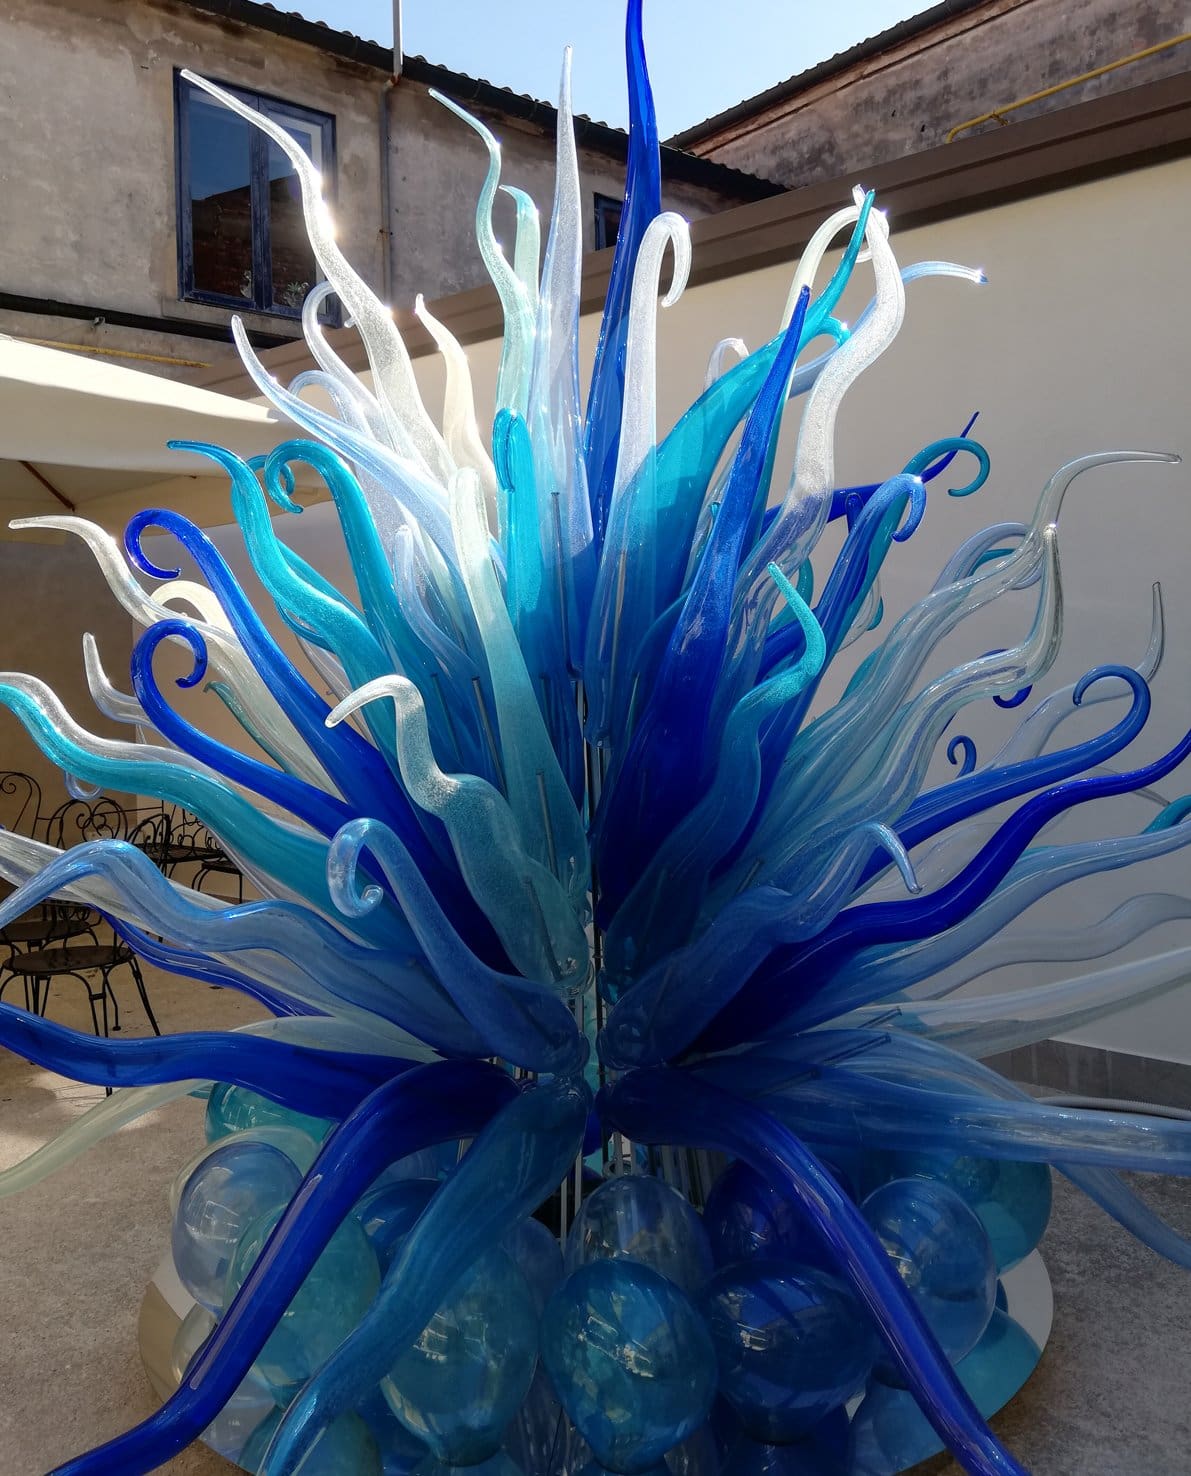 Murano glass sculpture for The Venice Glass Week 2019 Festival
Denise Gemin
view 01